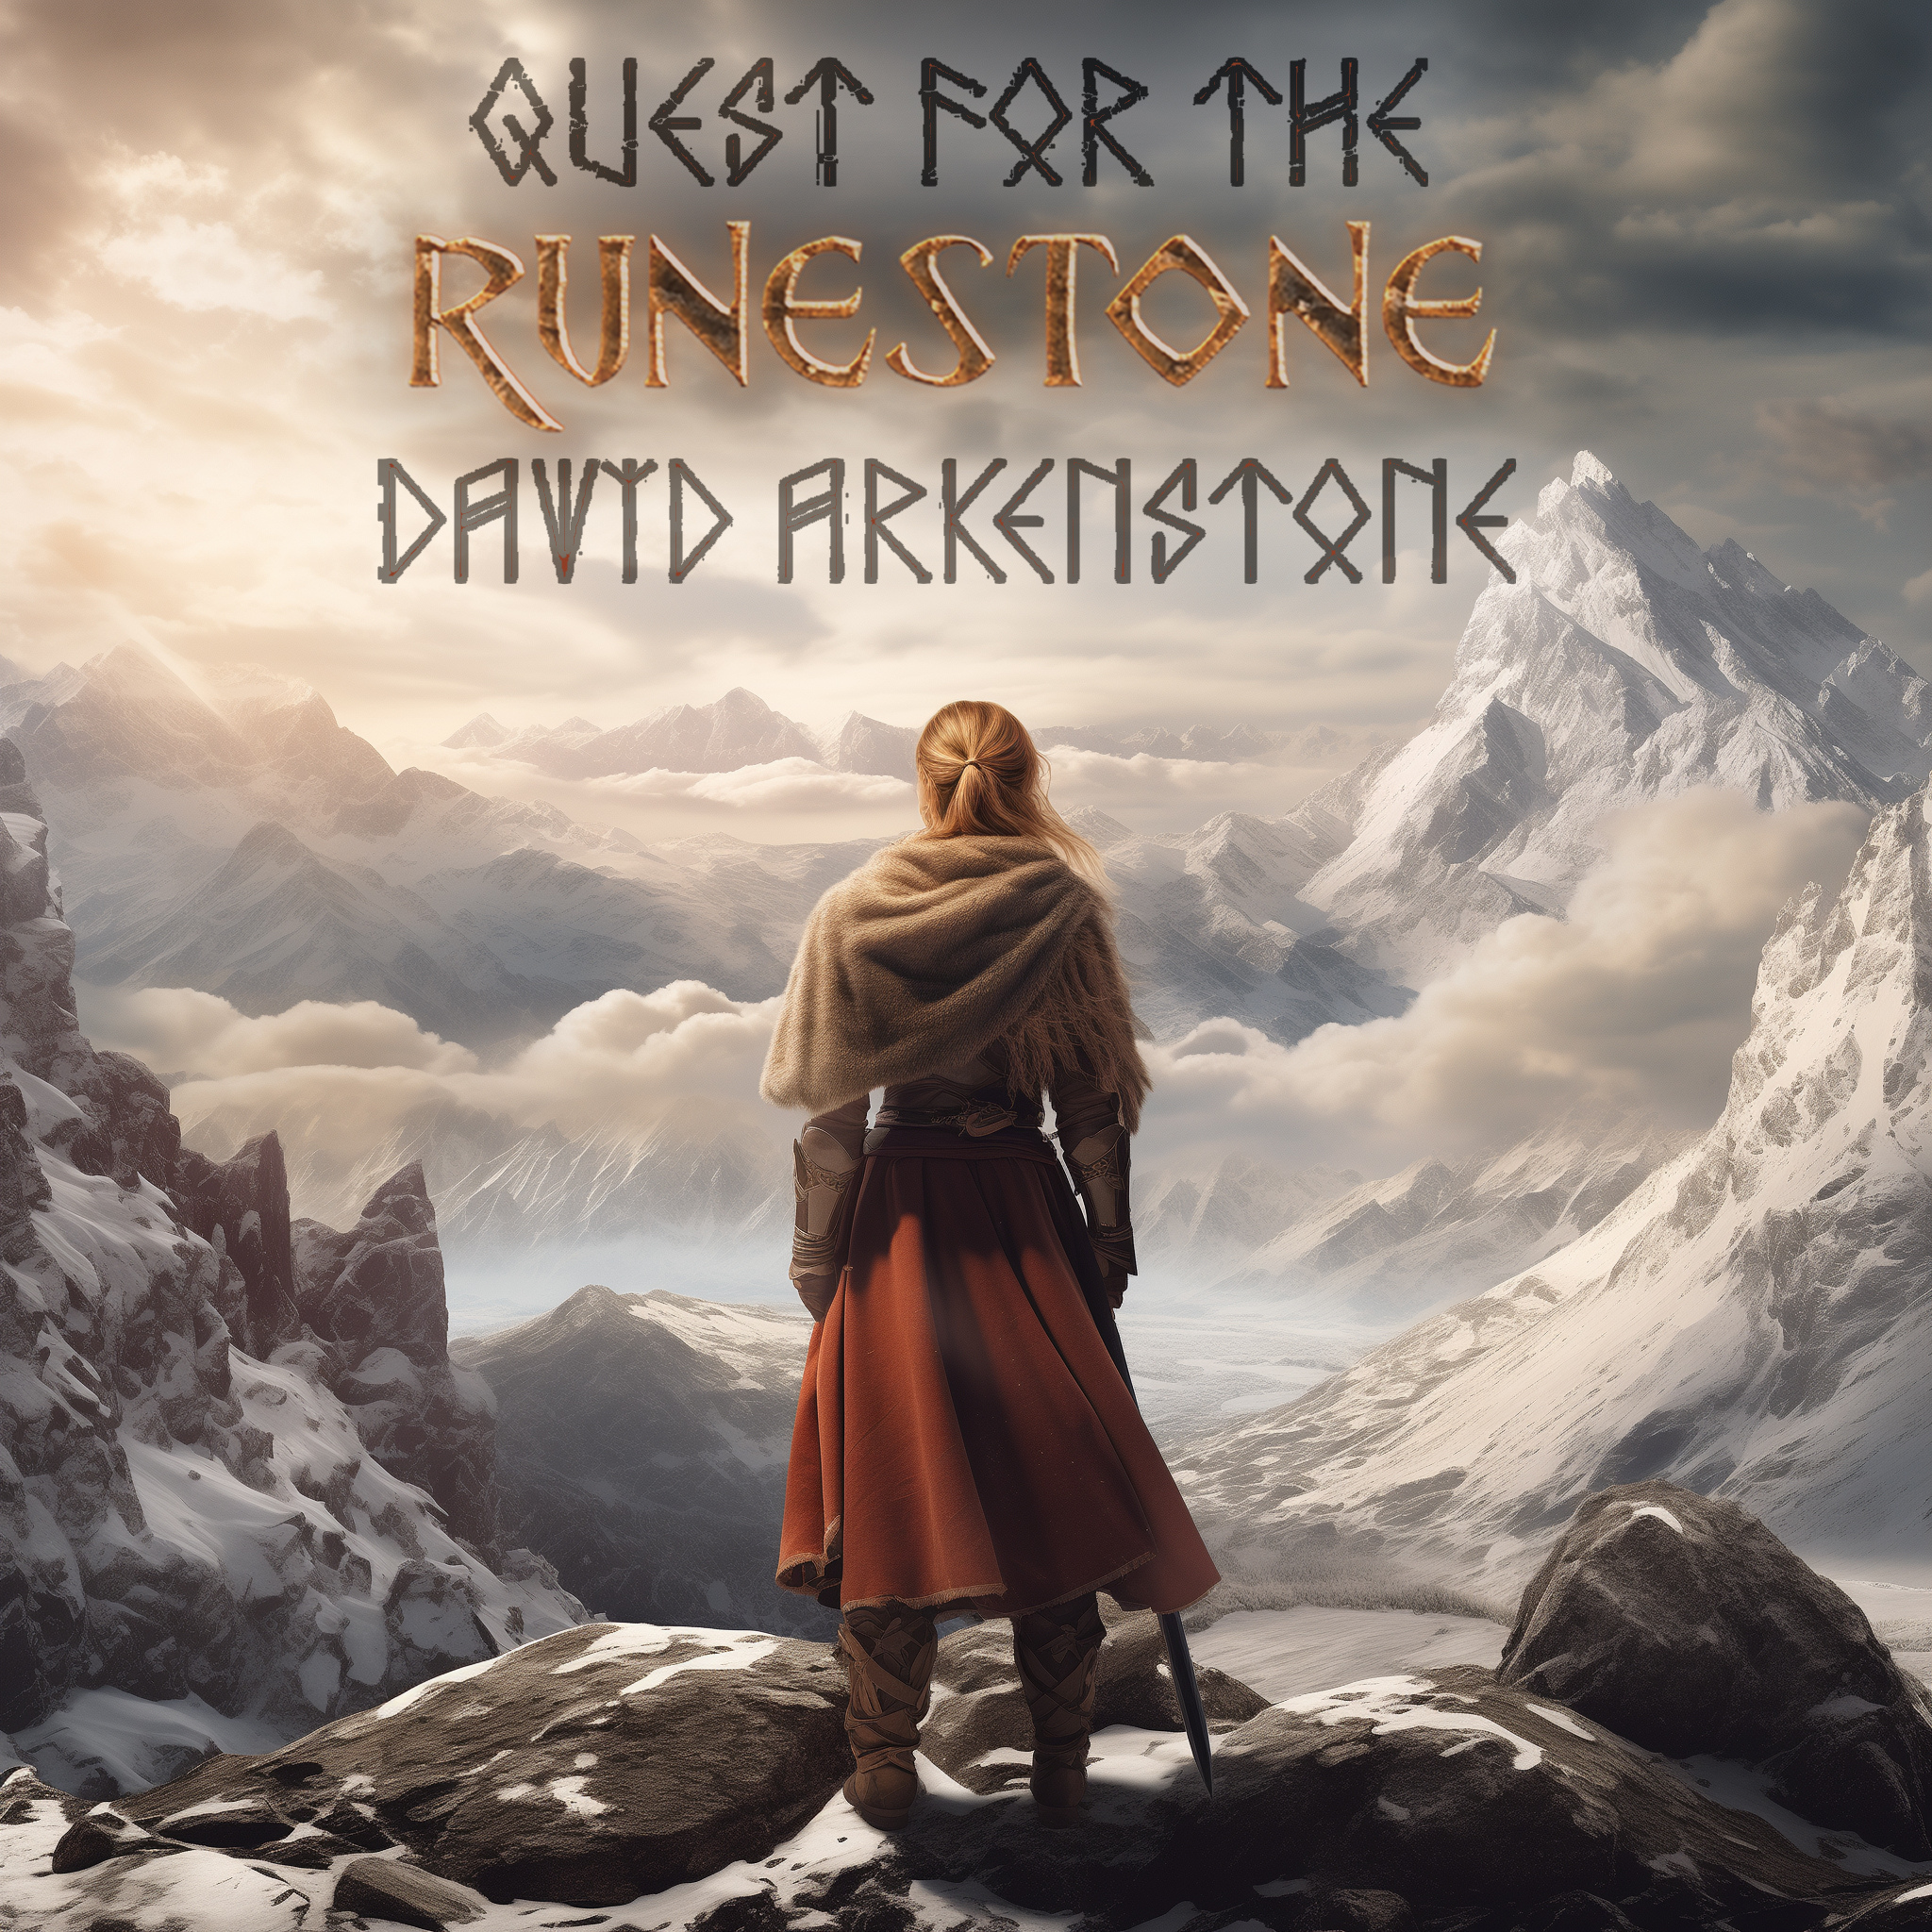 Multi-GRAMMY® Award Nominee David Arkenstone to Premiere New Release "Quest For The Runestone" in an Immersive Dolby Atmos® Experience